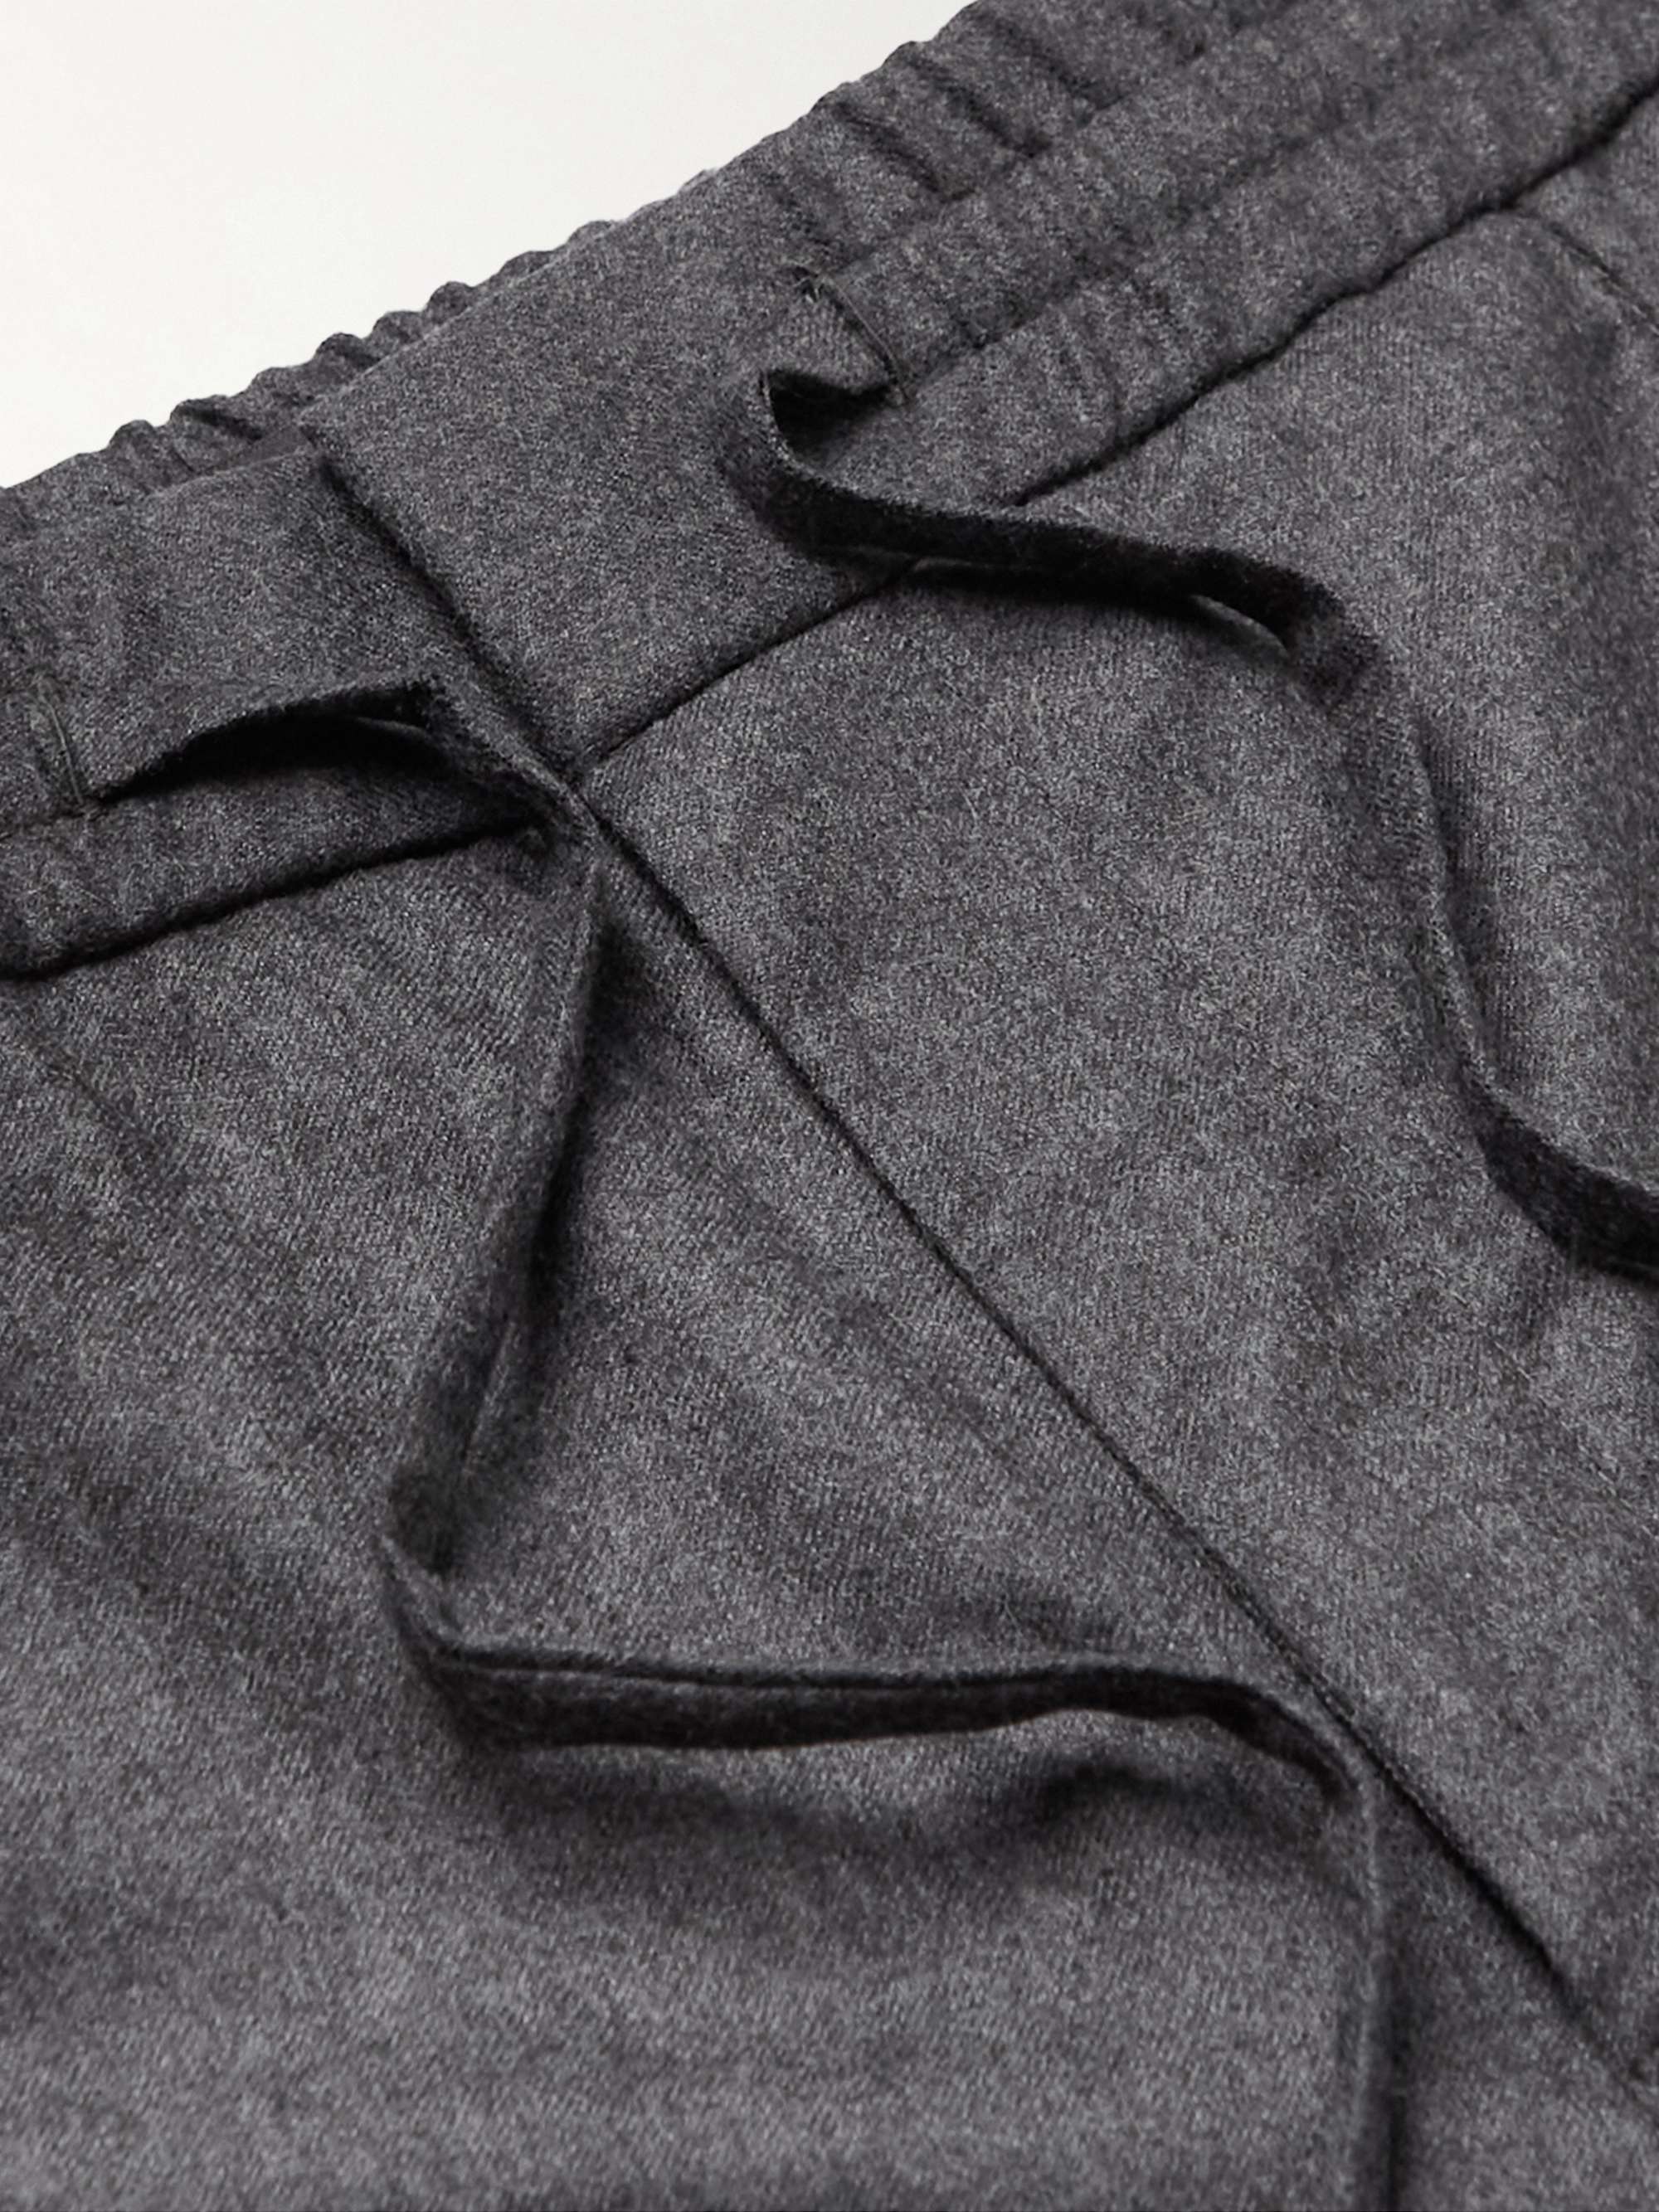 BRIONI Sidney Straight-Leg Wool and Cashmere-Blend Drawstring Trousers